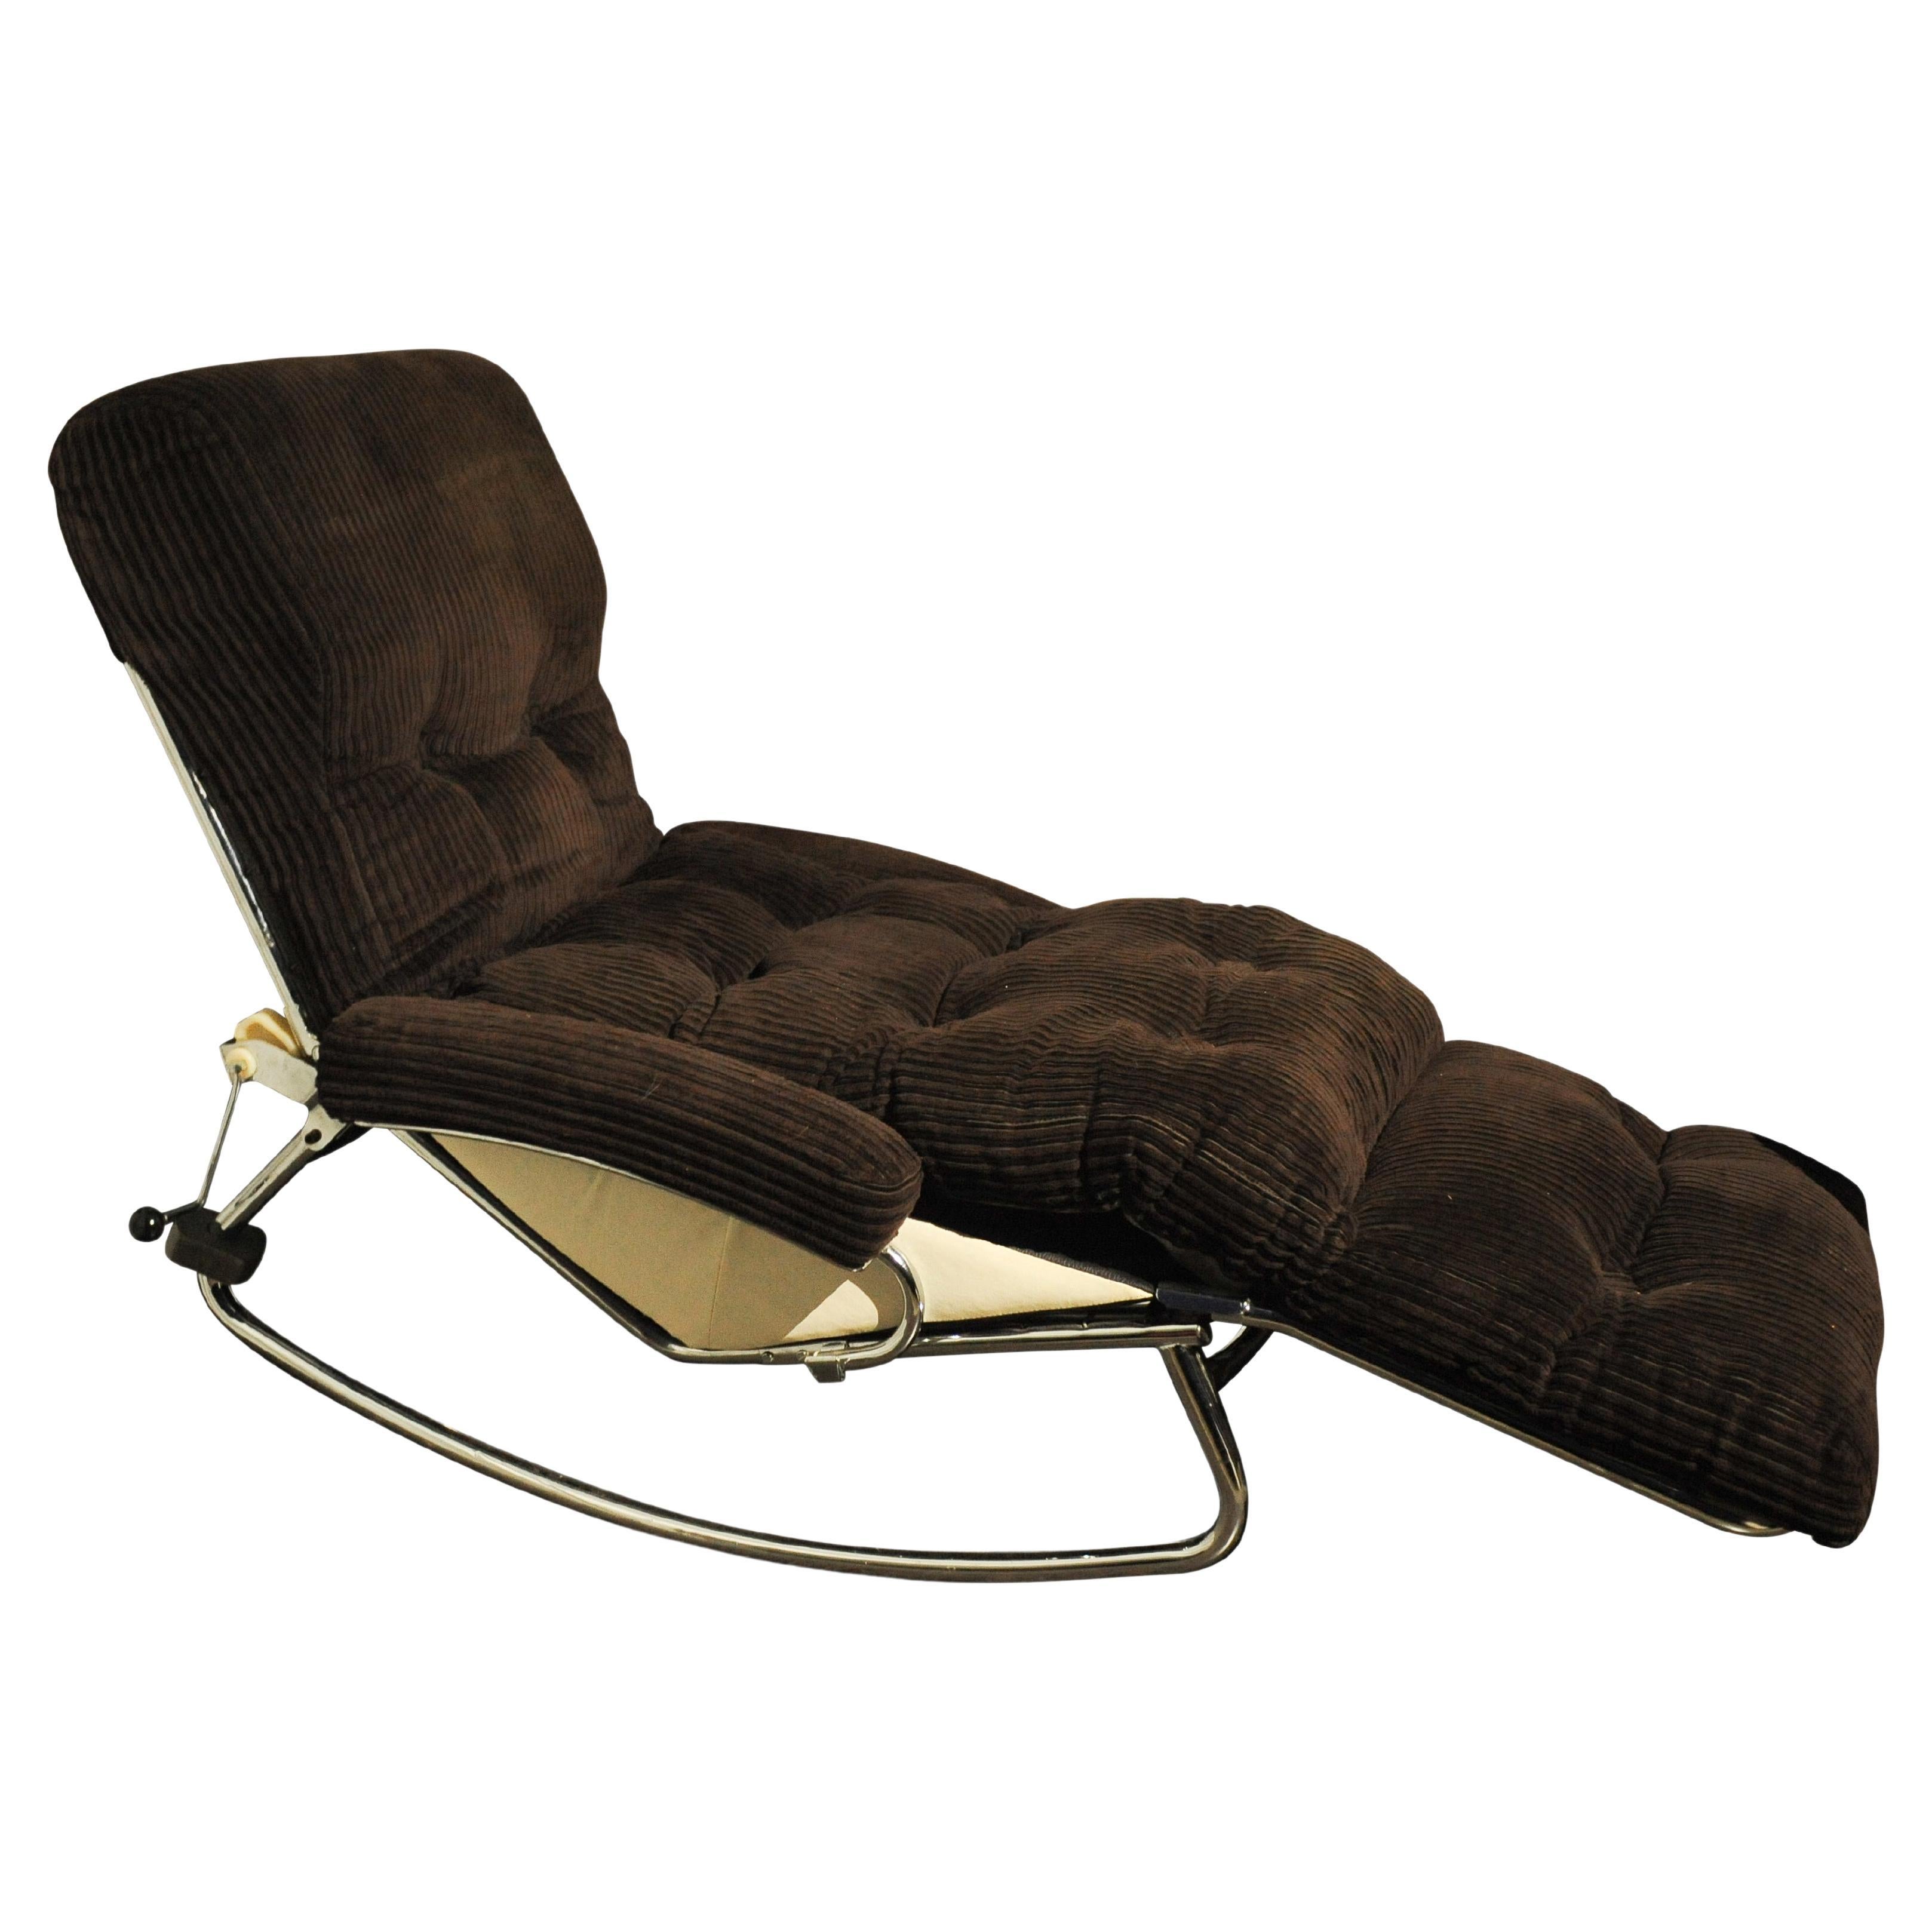 Tubular Chrome frame rocking chair with headrest & footrest upholstered in brown corduroy by Lama Made in France 1970s

Footrest is removable to make a shorted length chair.